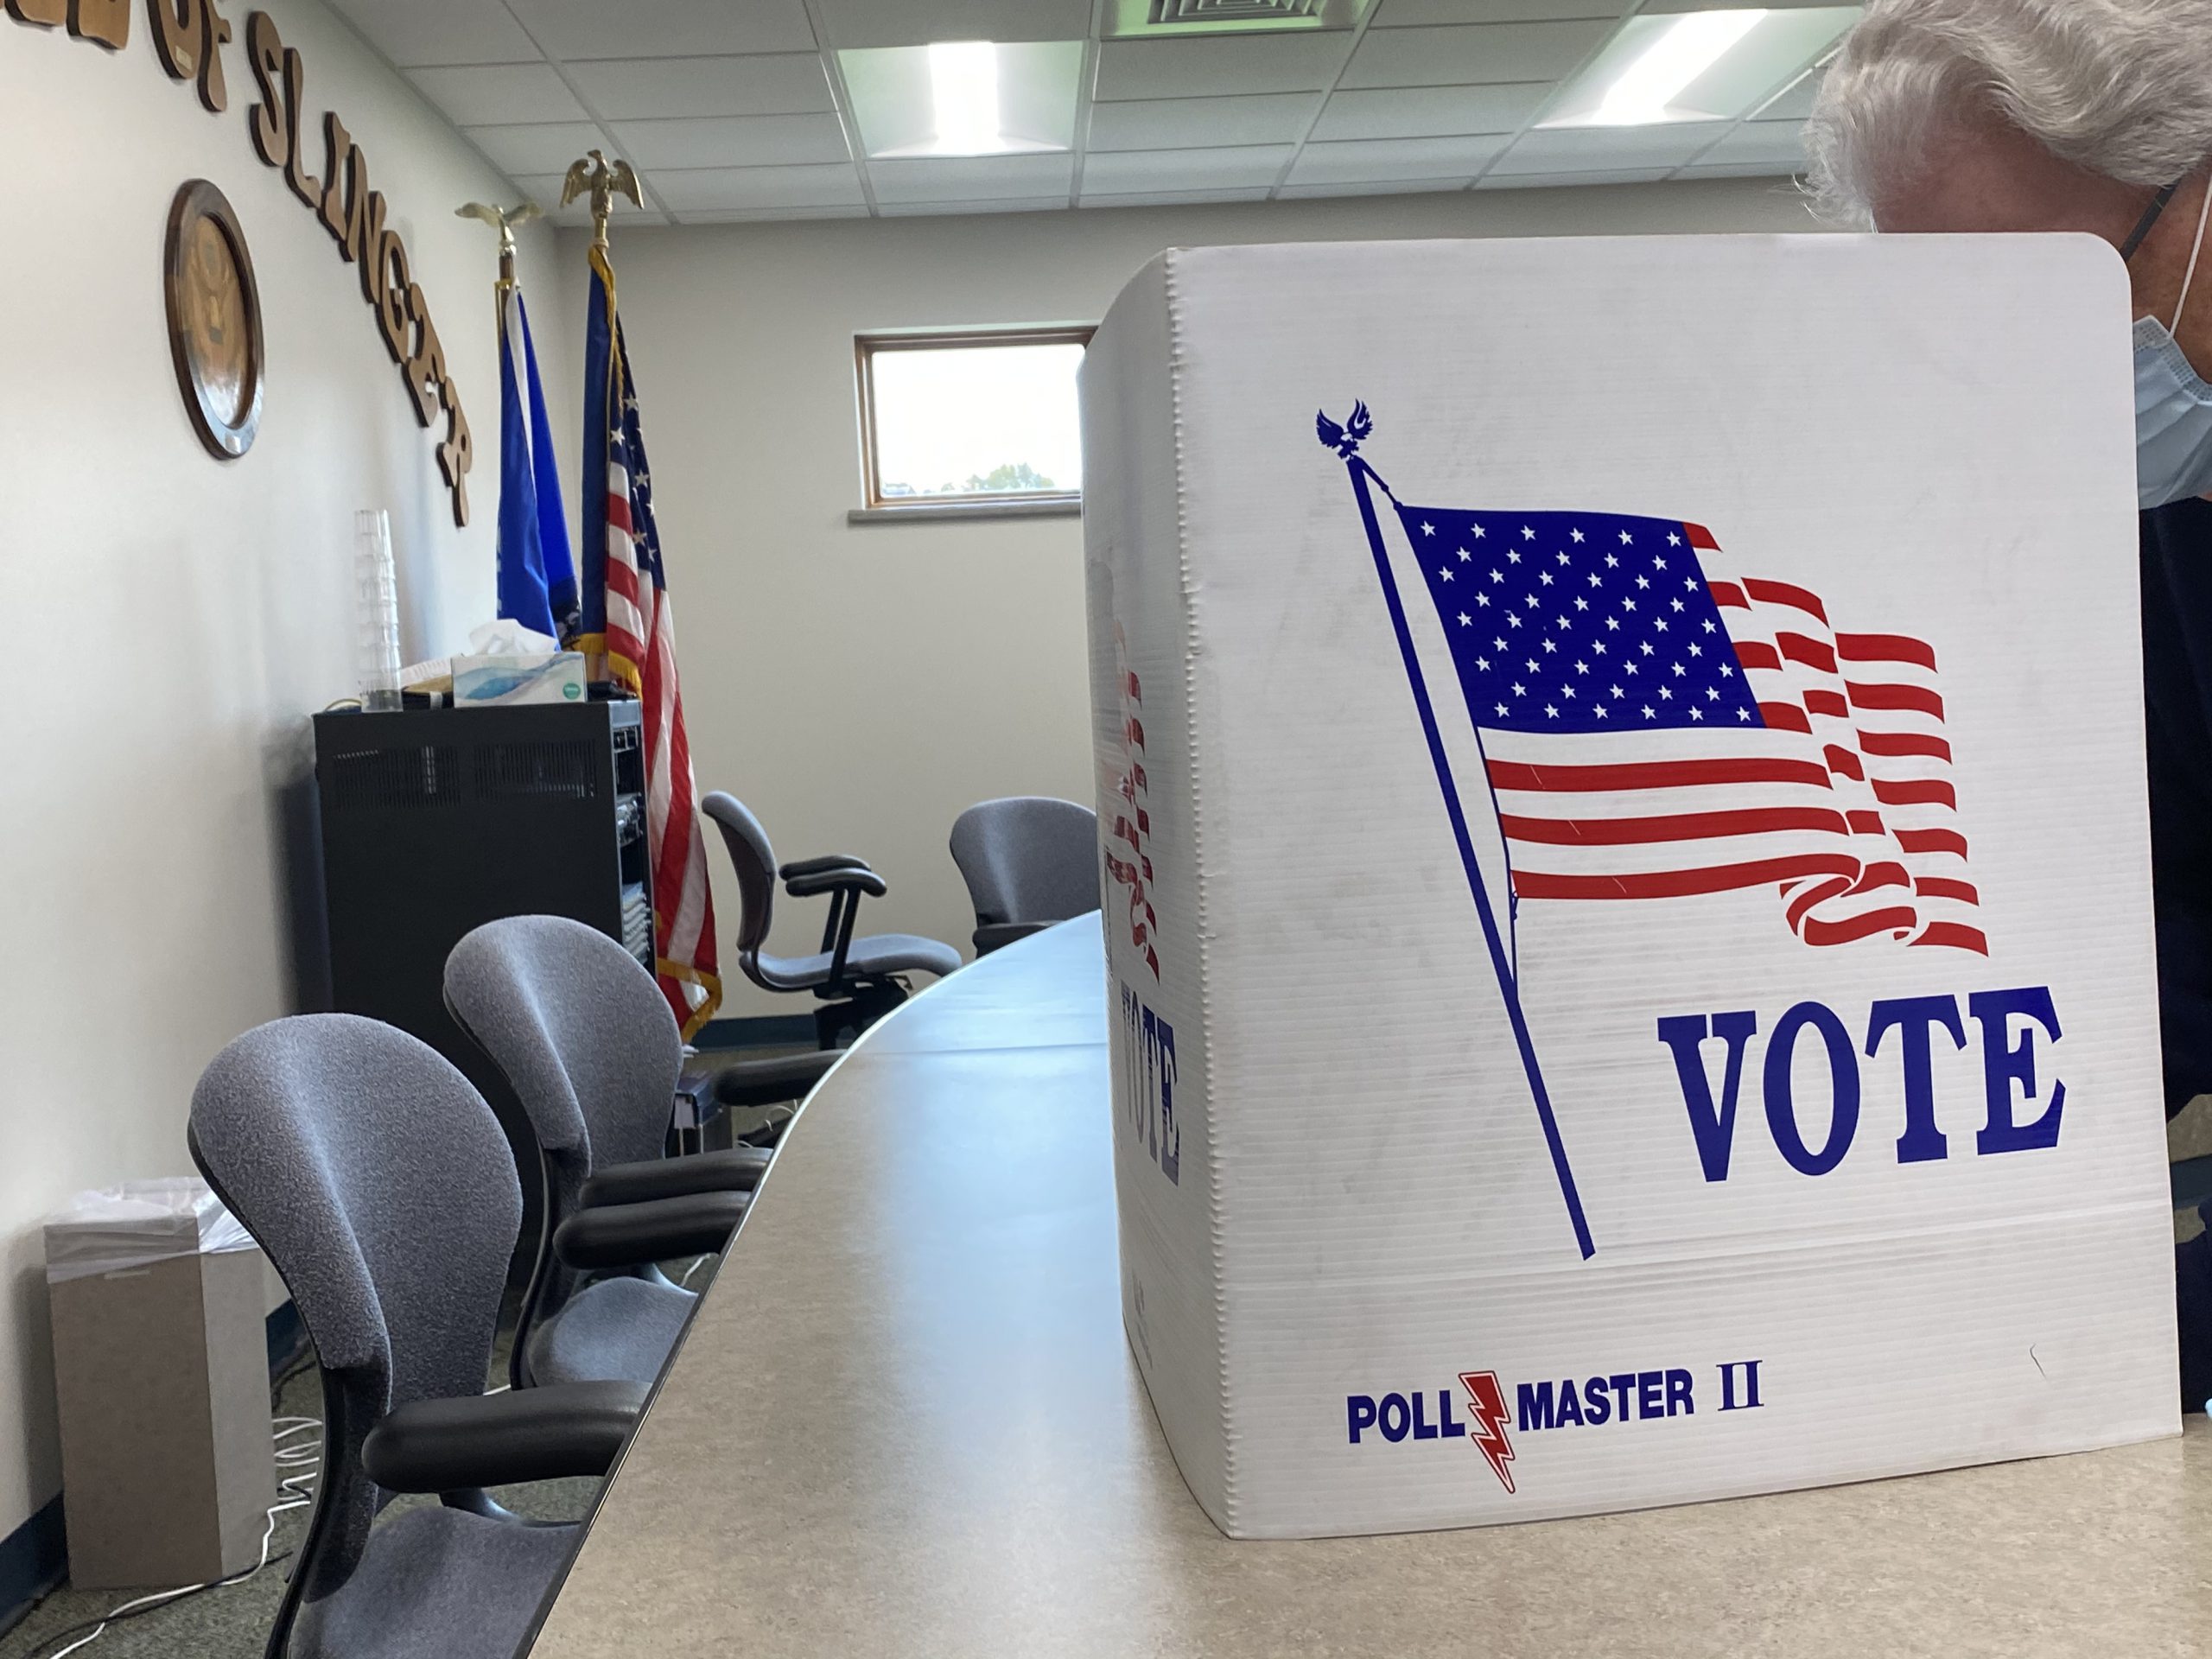 in-person absentee voting